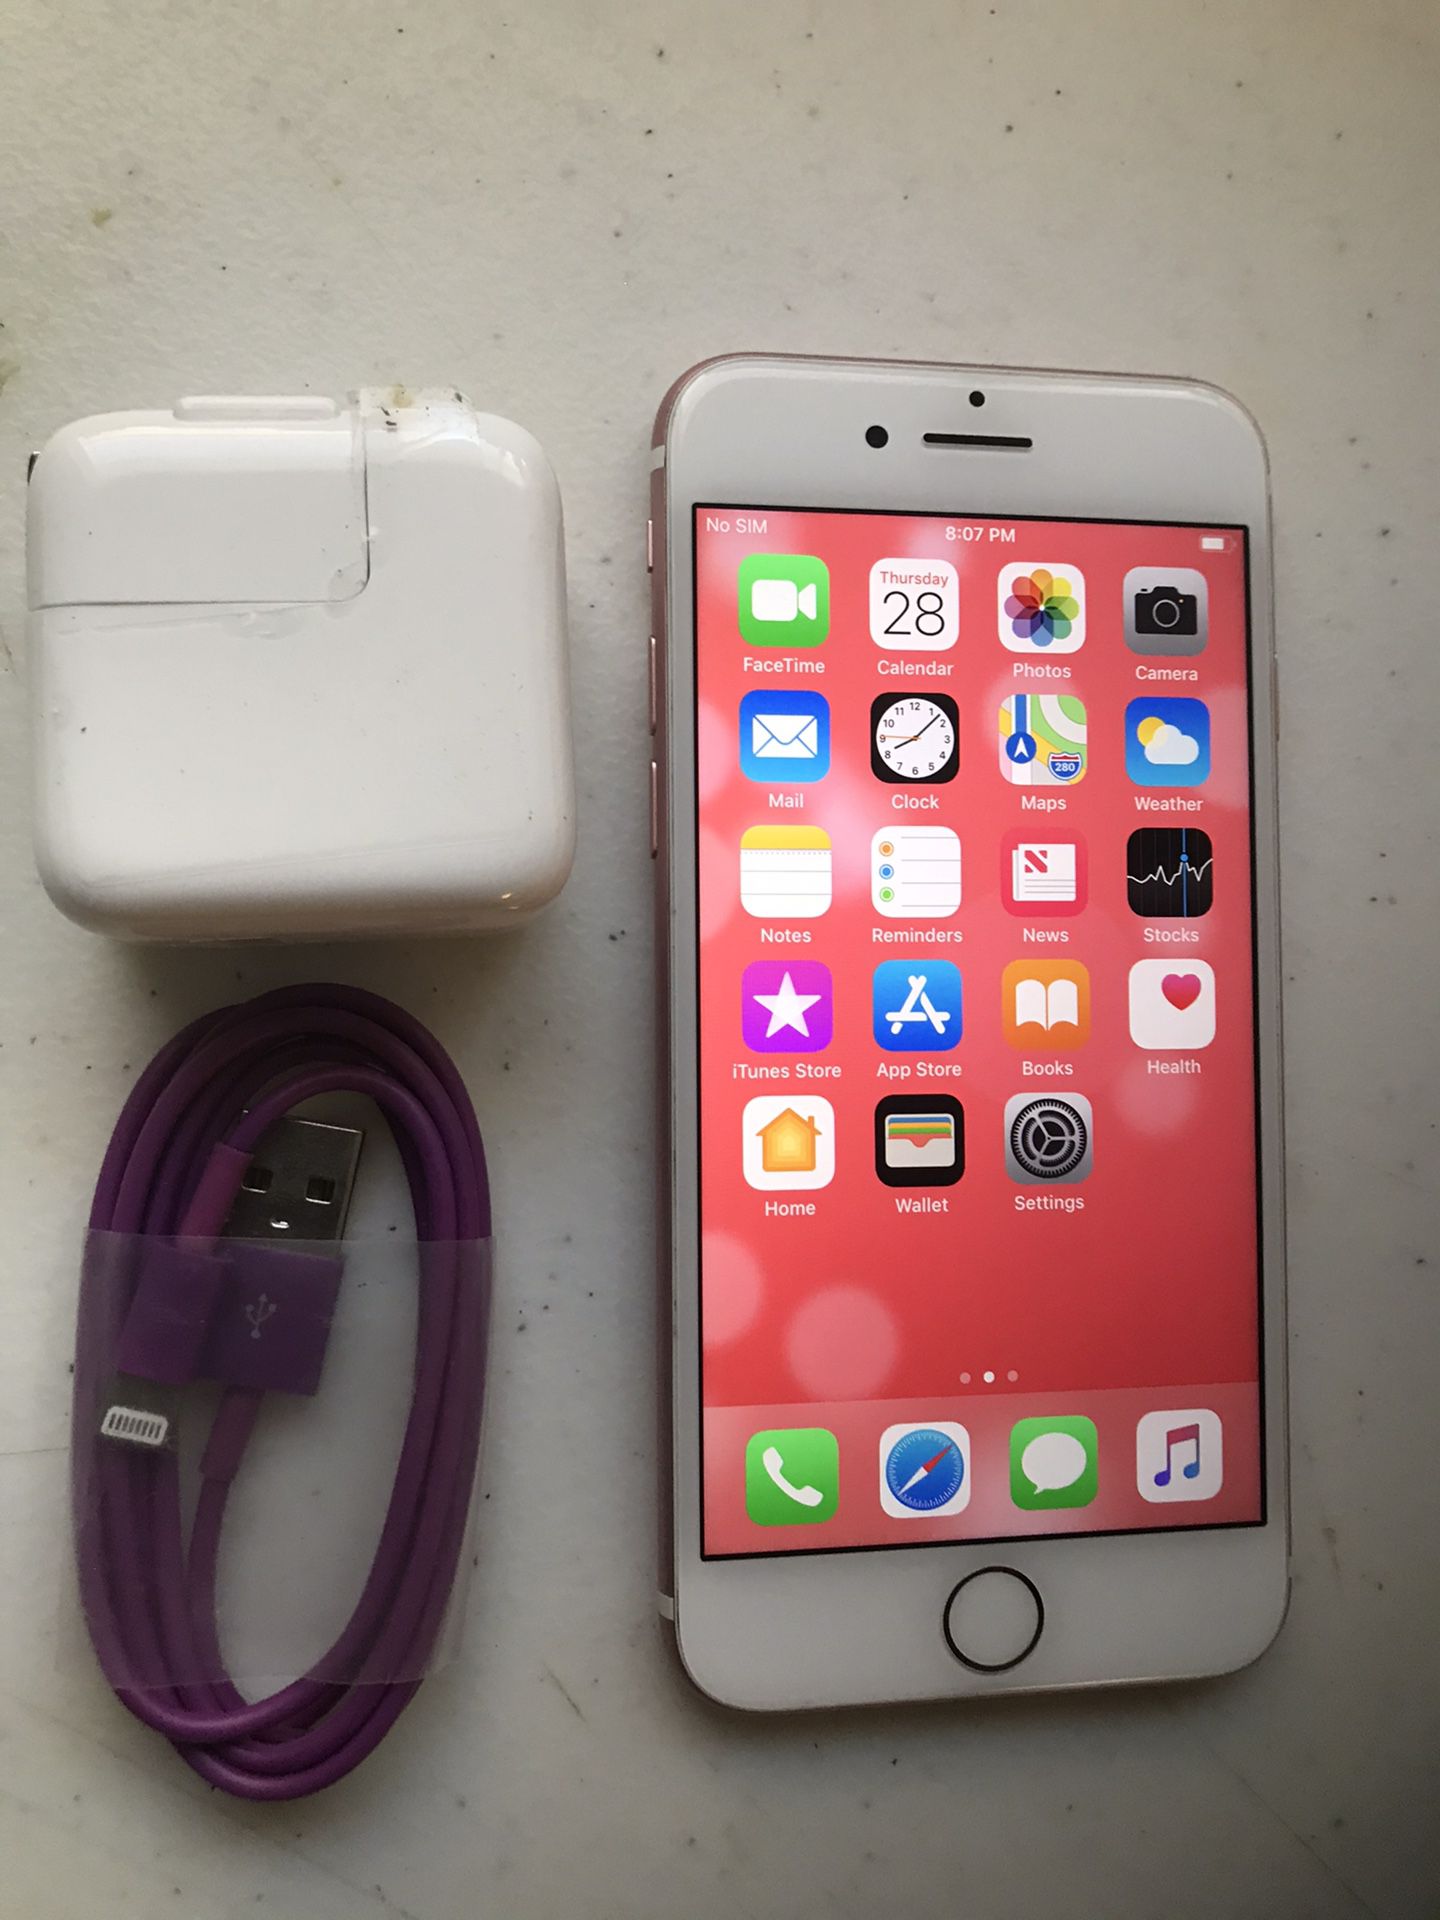 Apple iPhone 7 32 GB unlocked color gold Rose.work very well.included charger.perfect condition